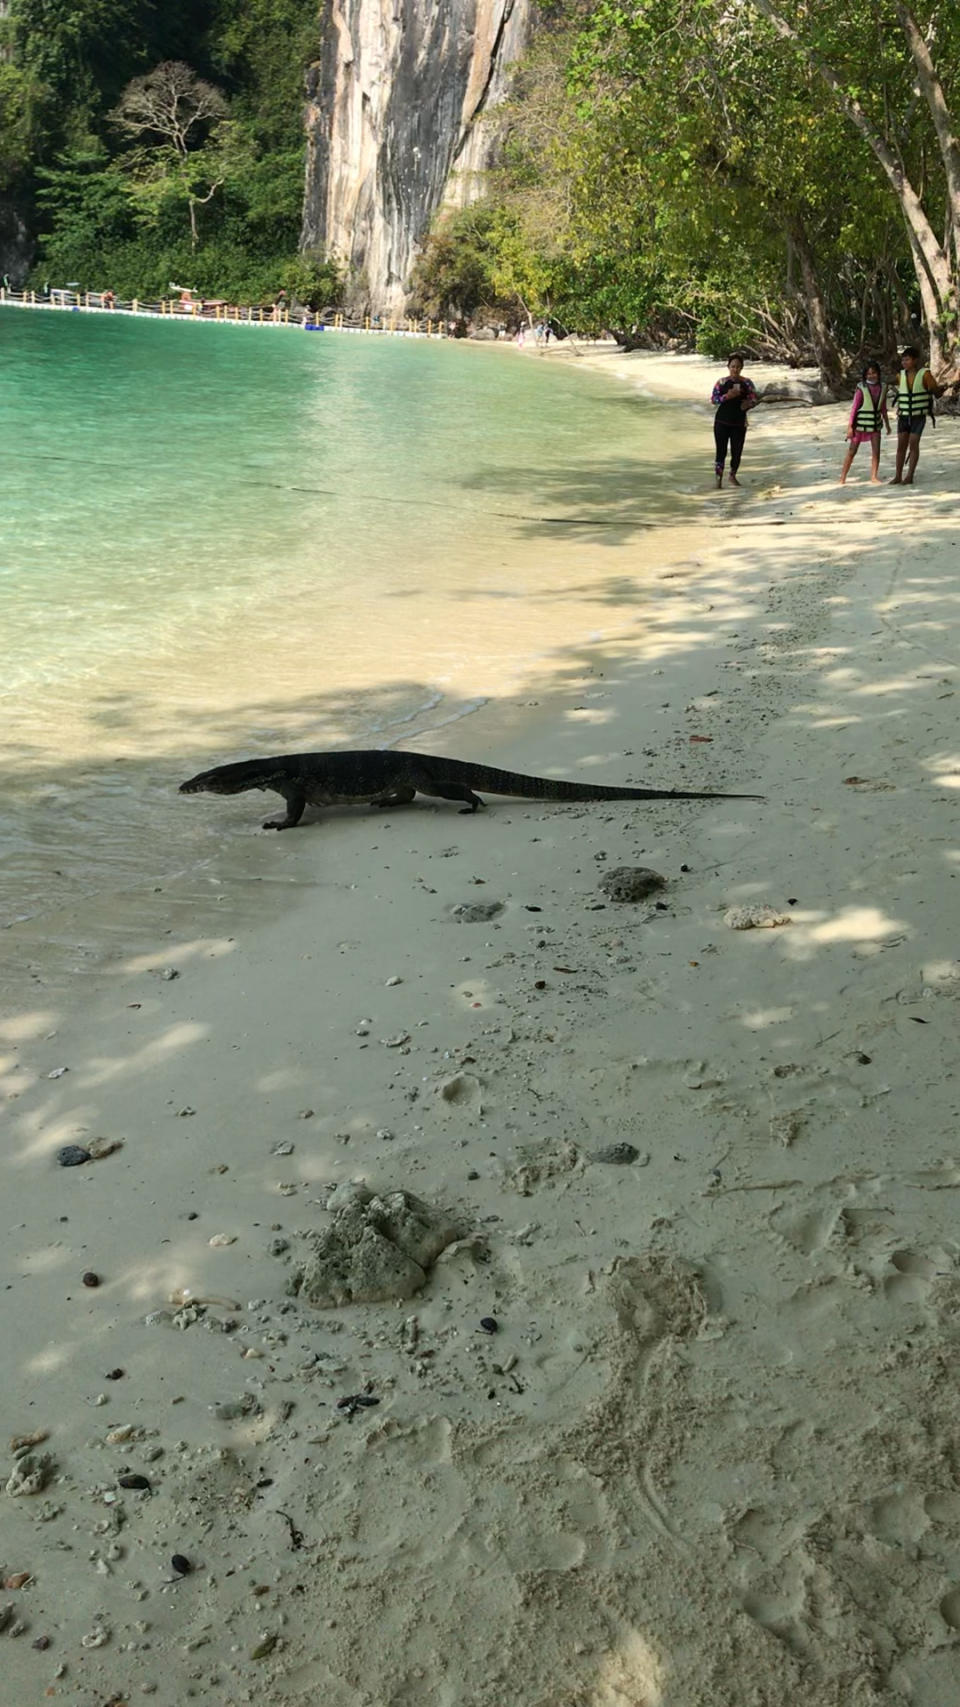 The monitor lizard often visits the beach to eat scraps left behind by tourists. Source: Viral Press/Australscope